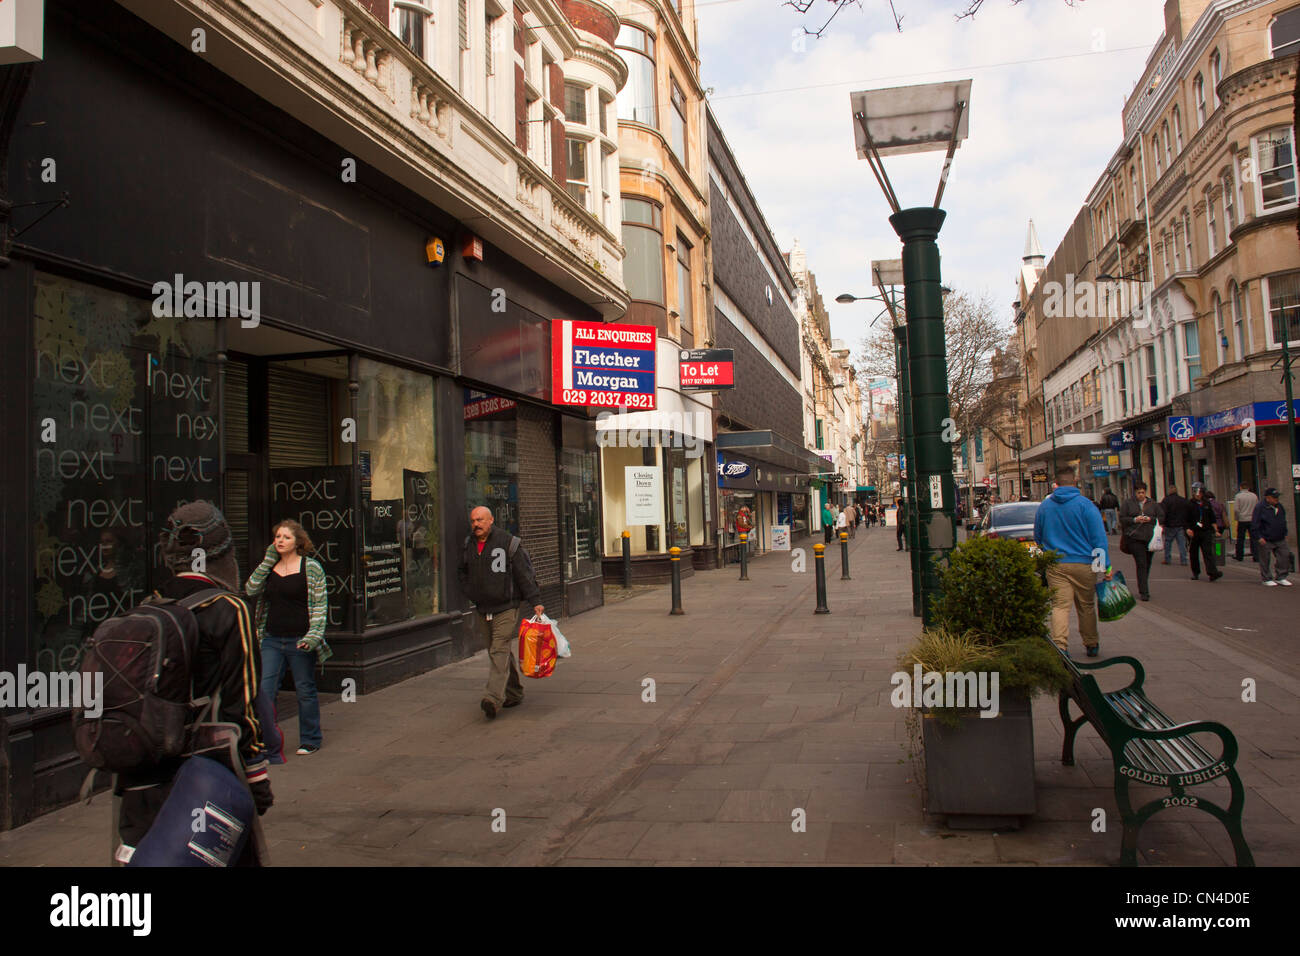 Empty retail premises, shops up for sale/rent in city center. Stock Photo